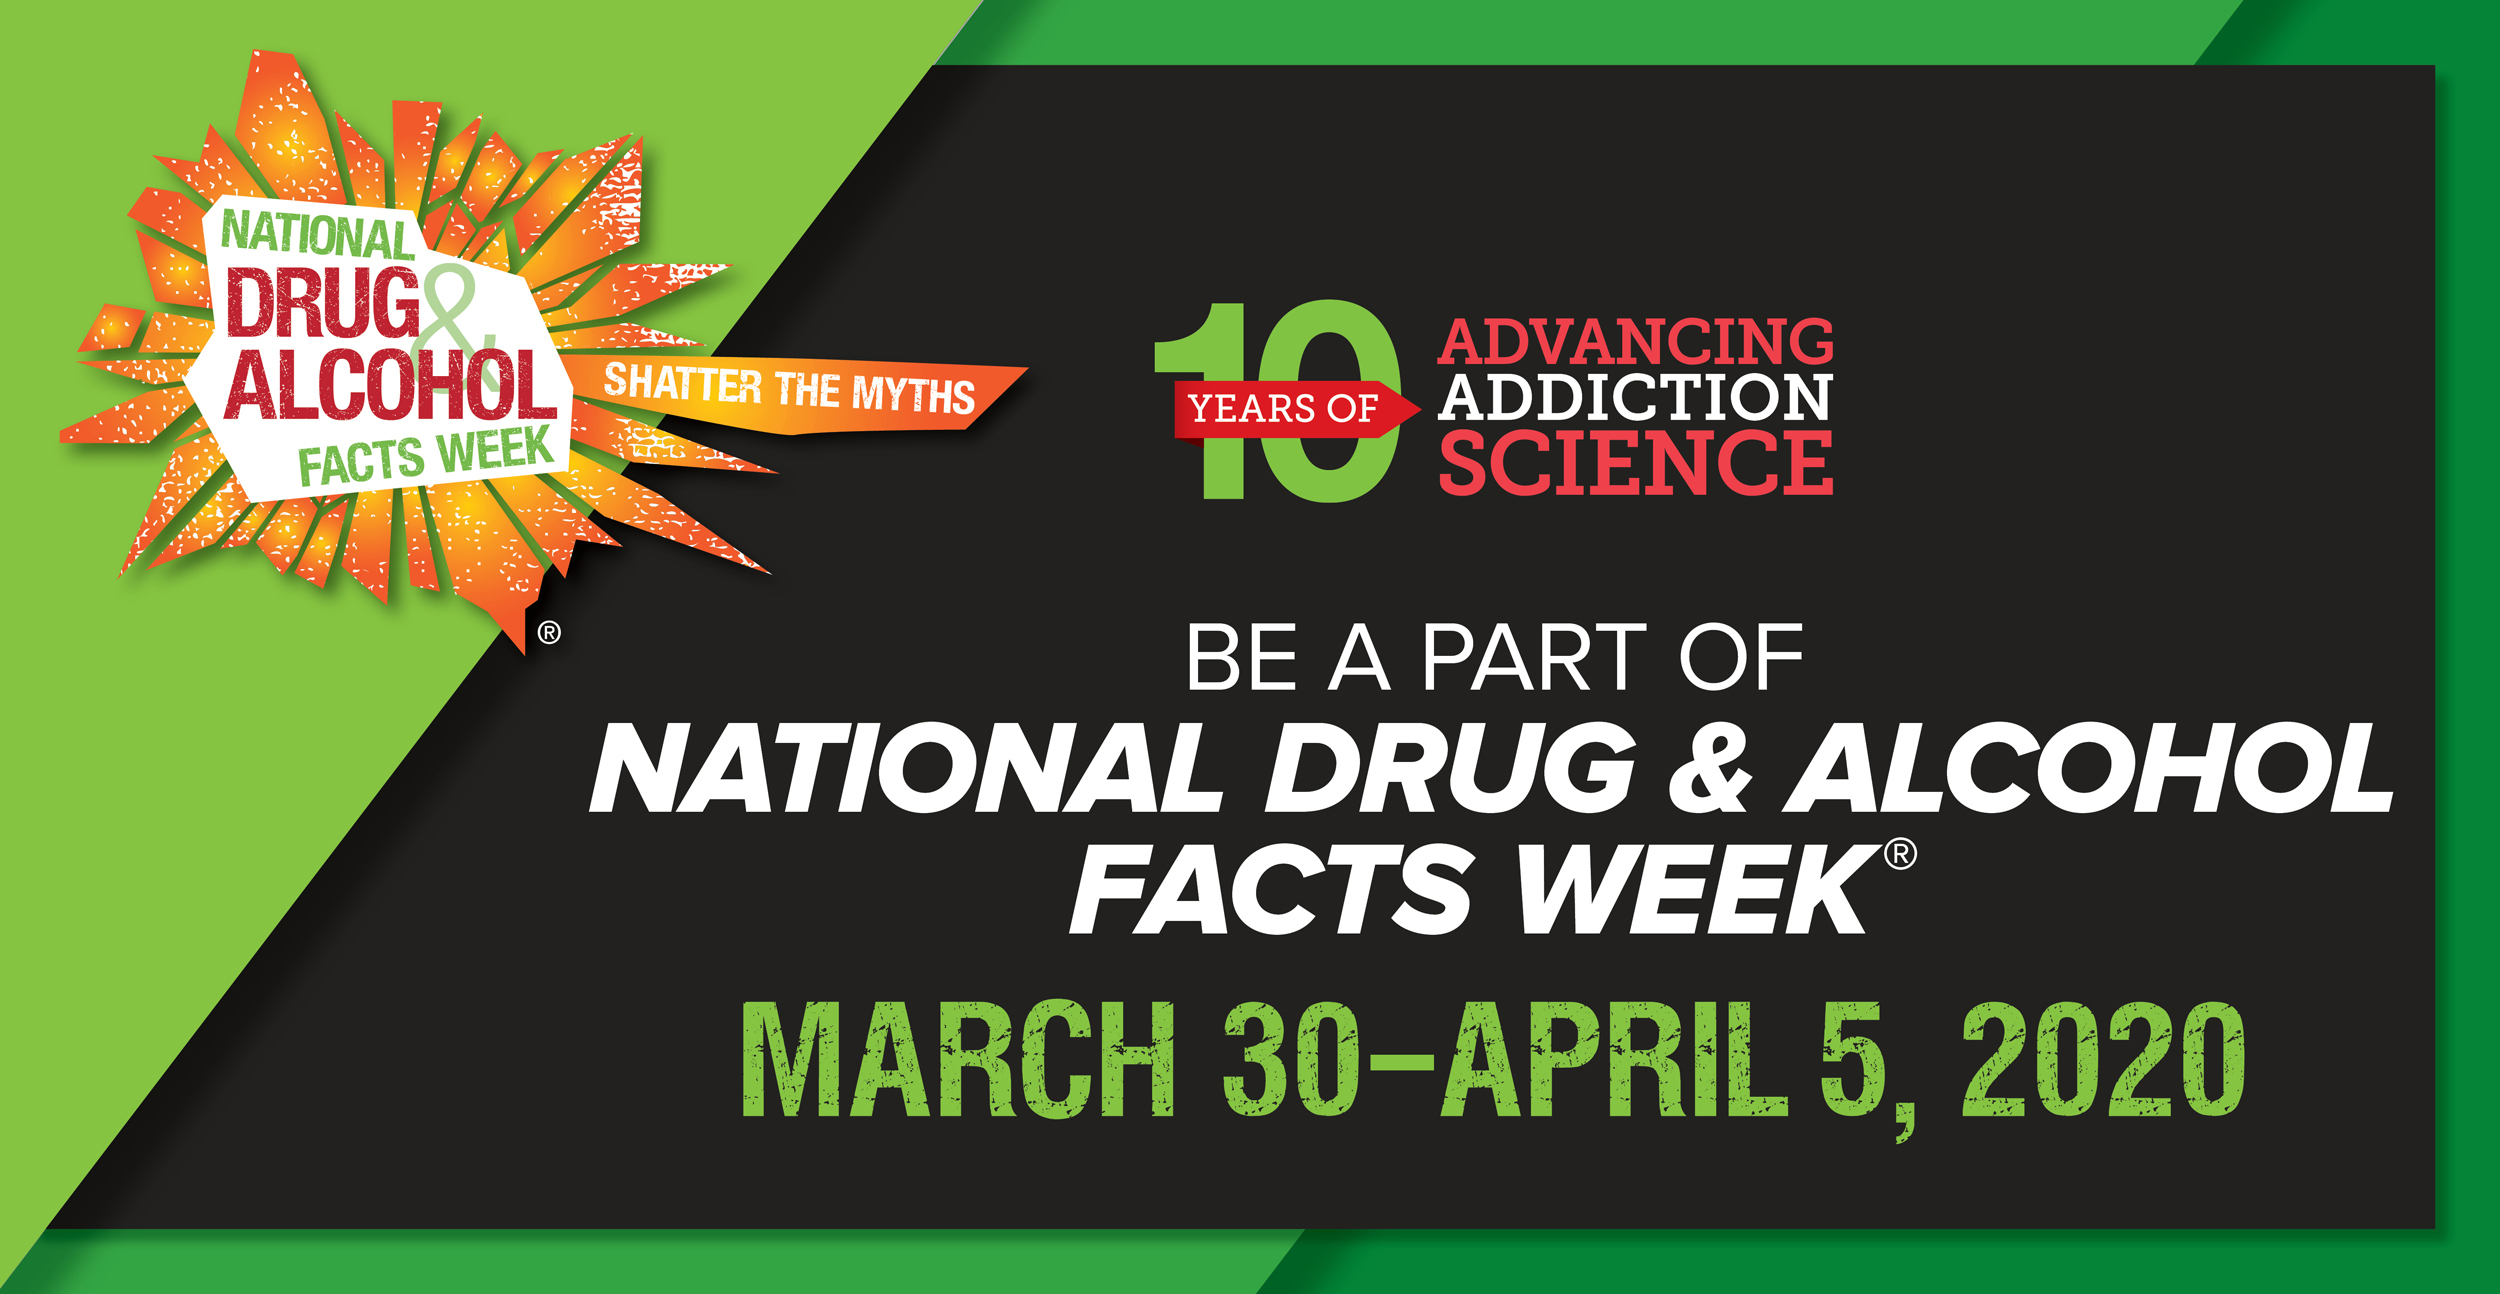 National Drug and Alcohol Facts Week celebrates 10 years National